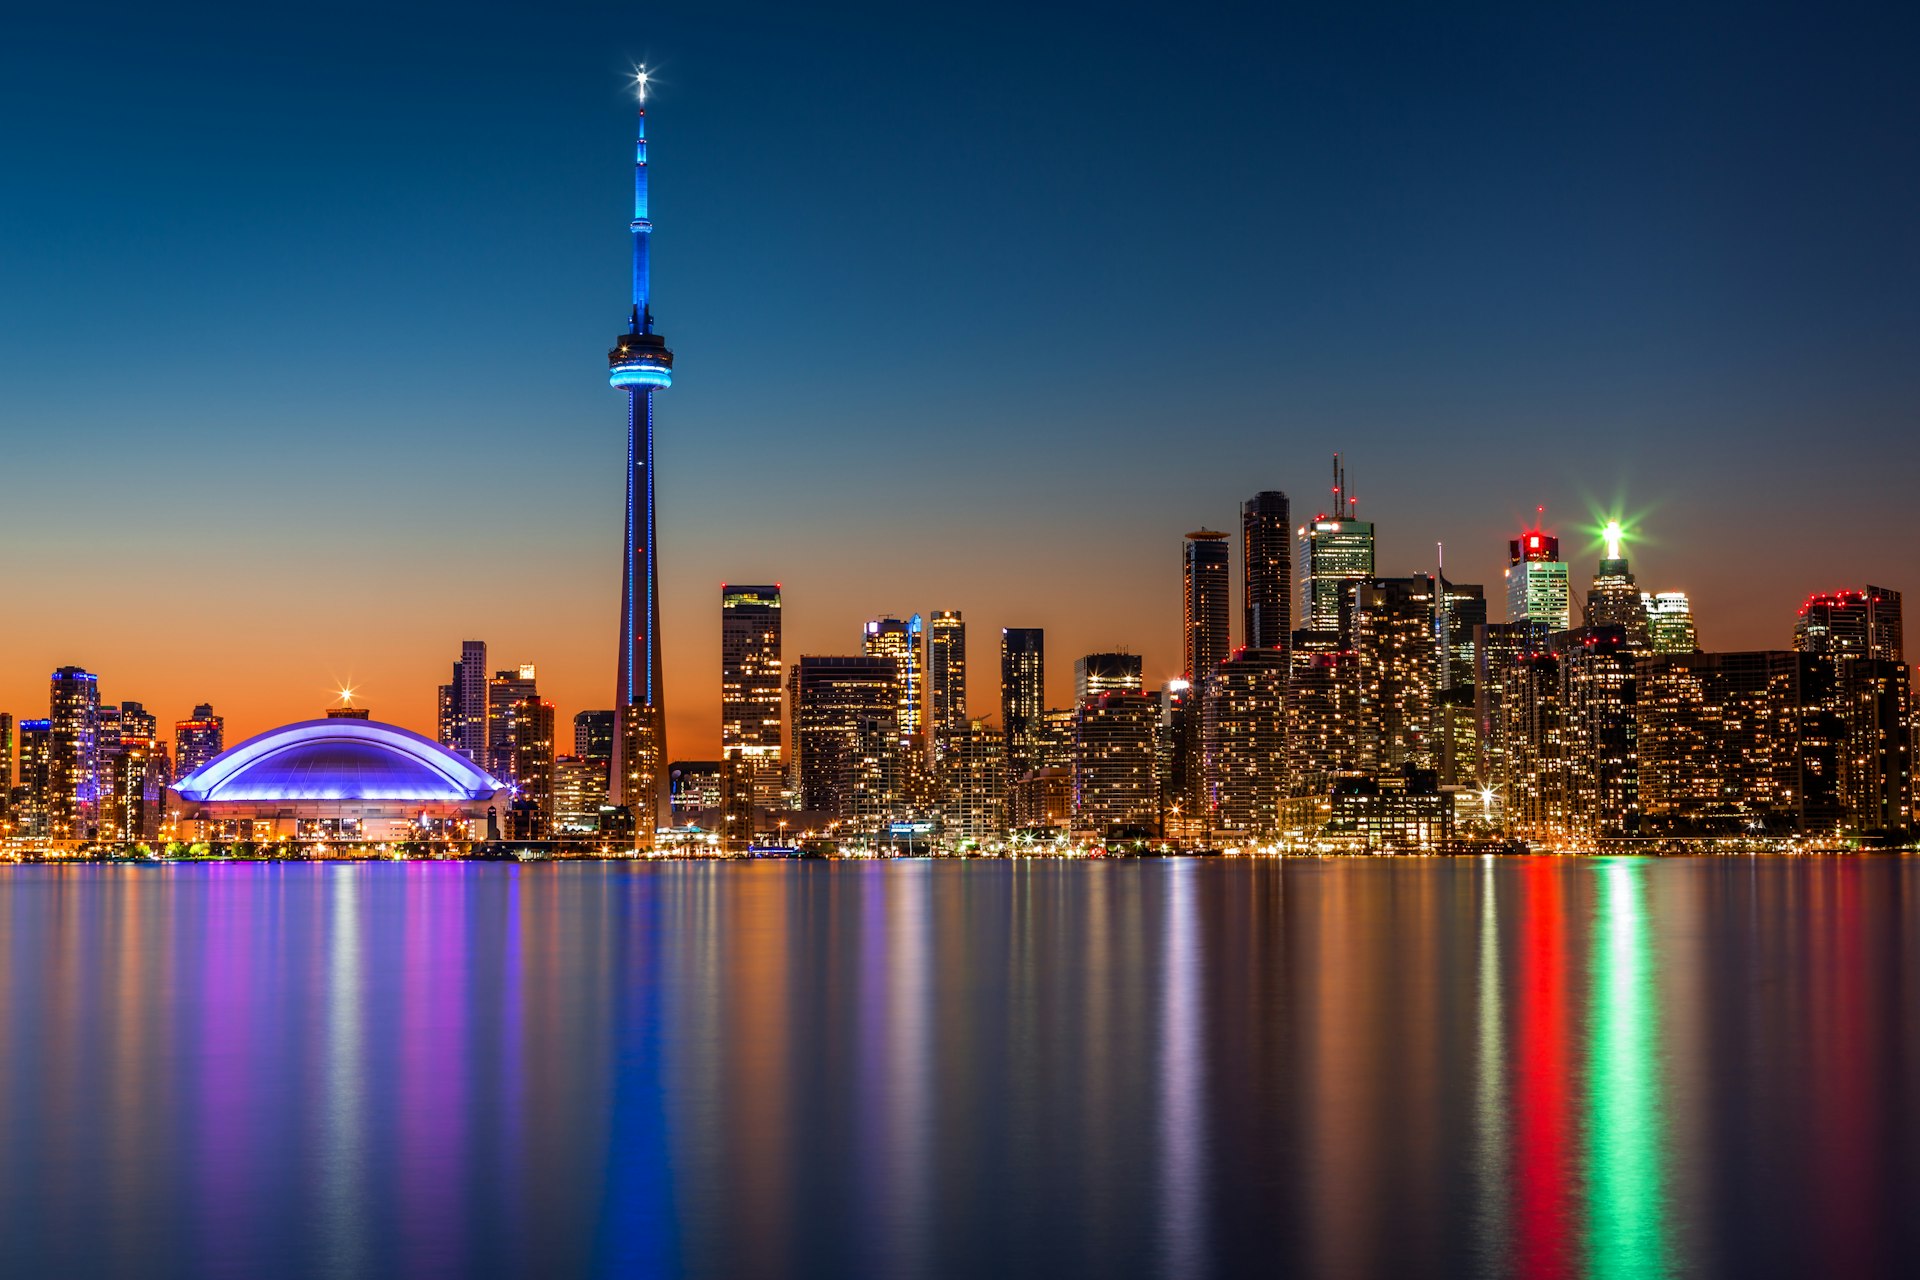 The Toronto skyline at dusk, with a tall needle-like building dominating the shot. Lights are reflected on the water.